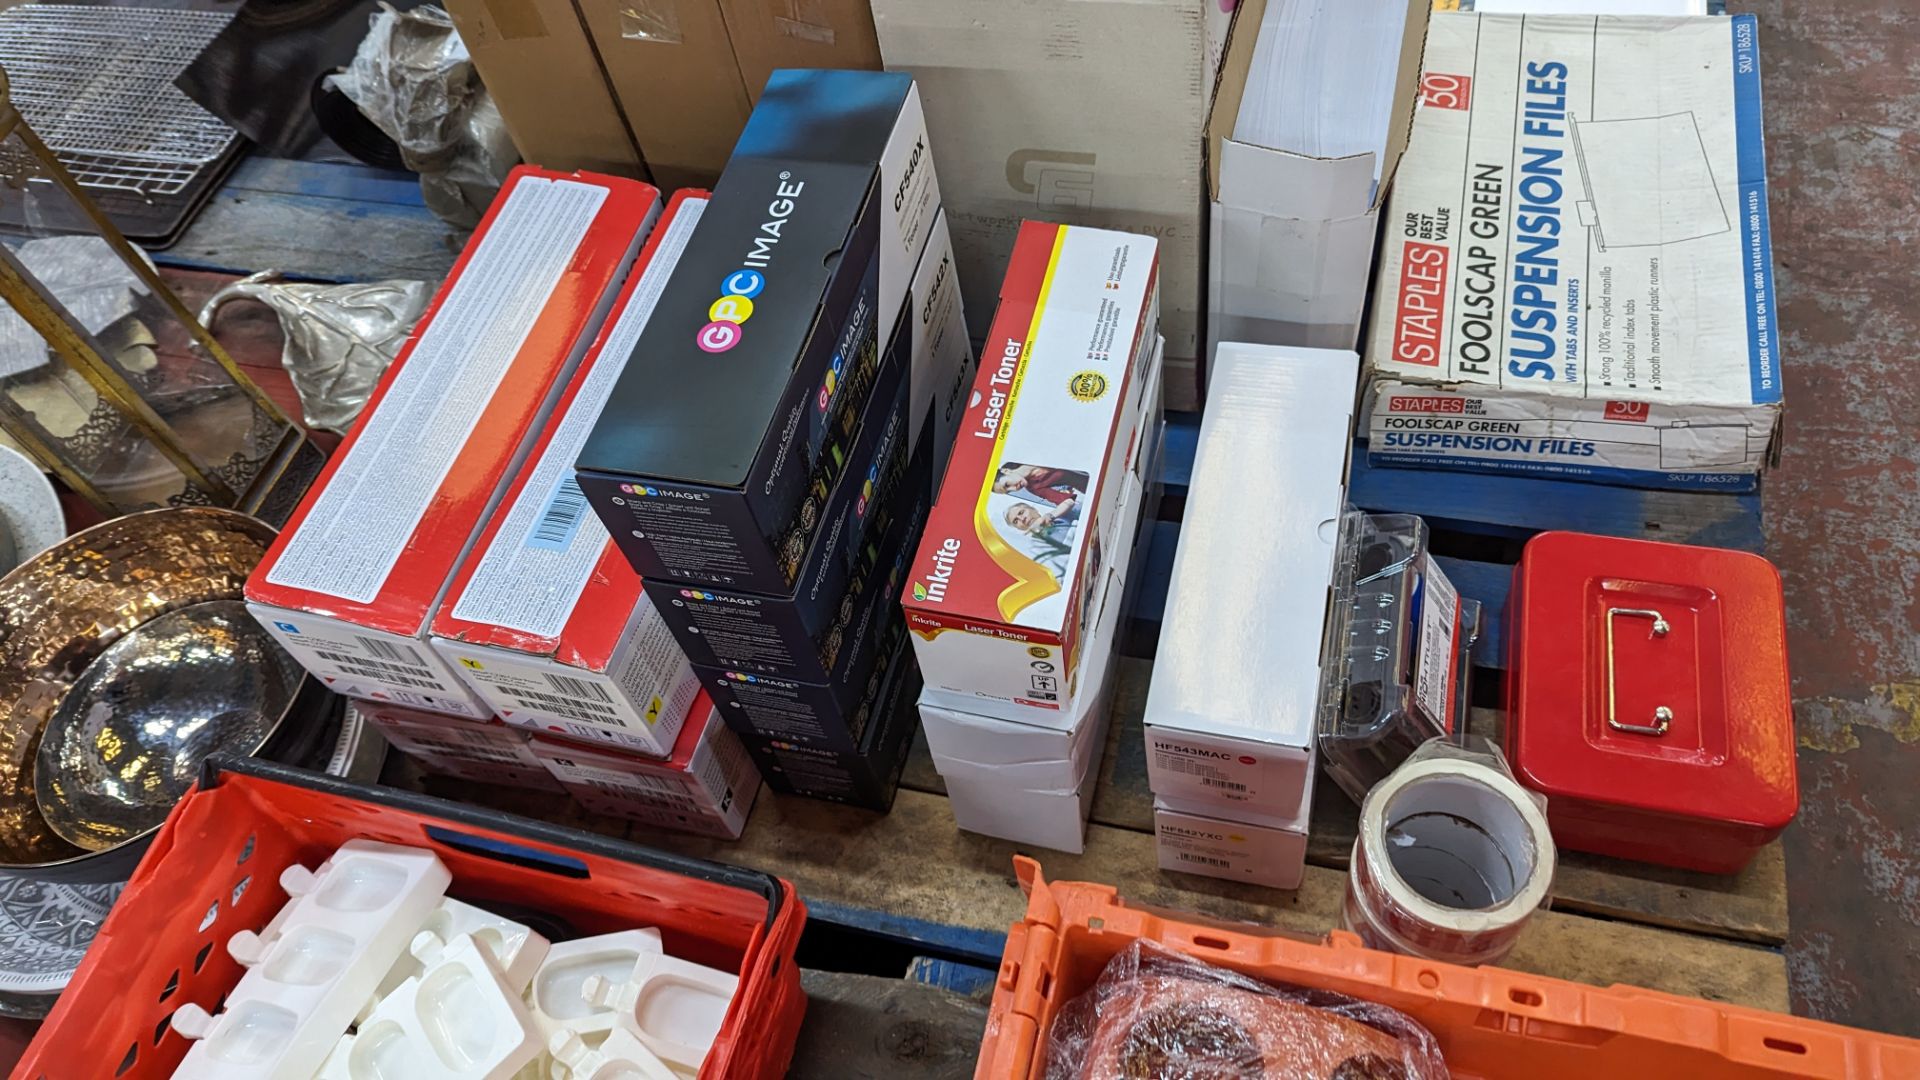 The contents of a pallet of office stationery including paper, till roll, envelopes, laser cartridge - Image 6 of 8